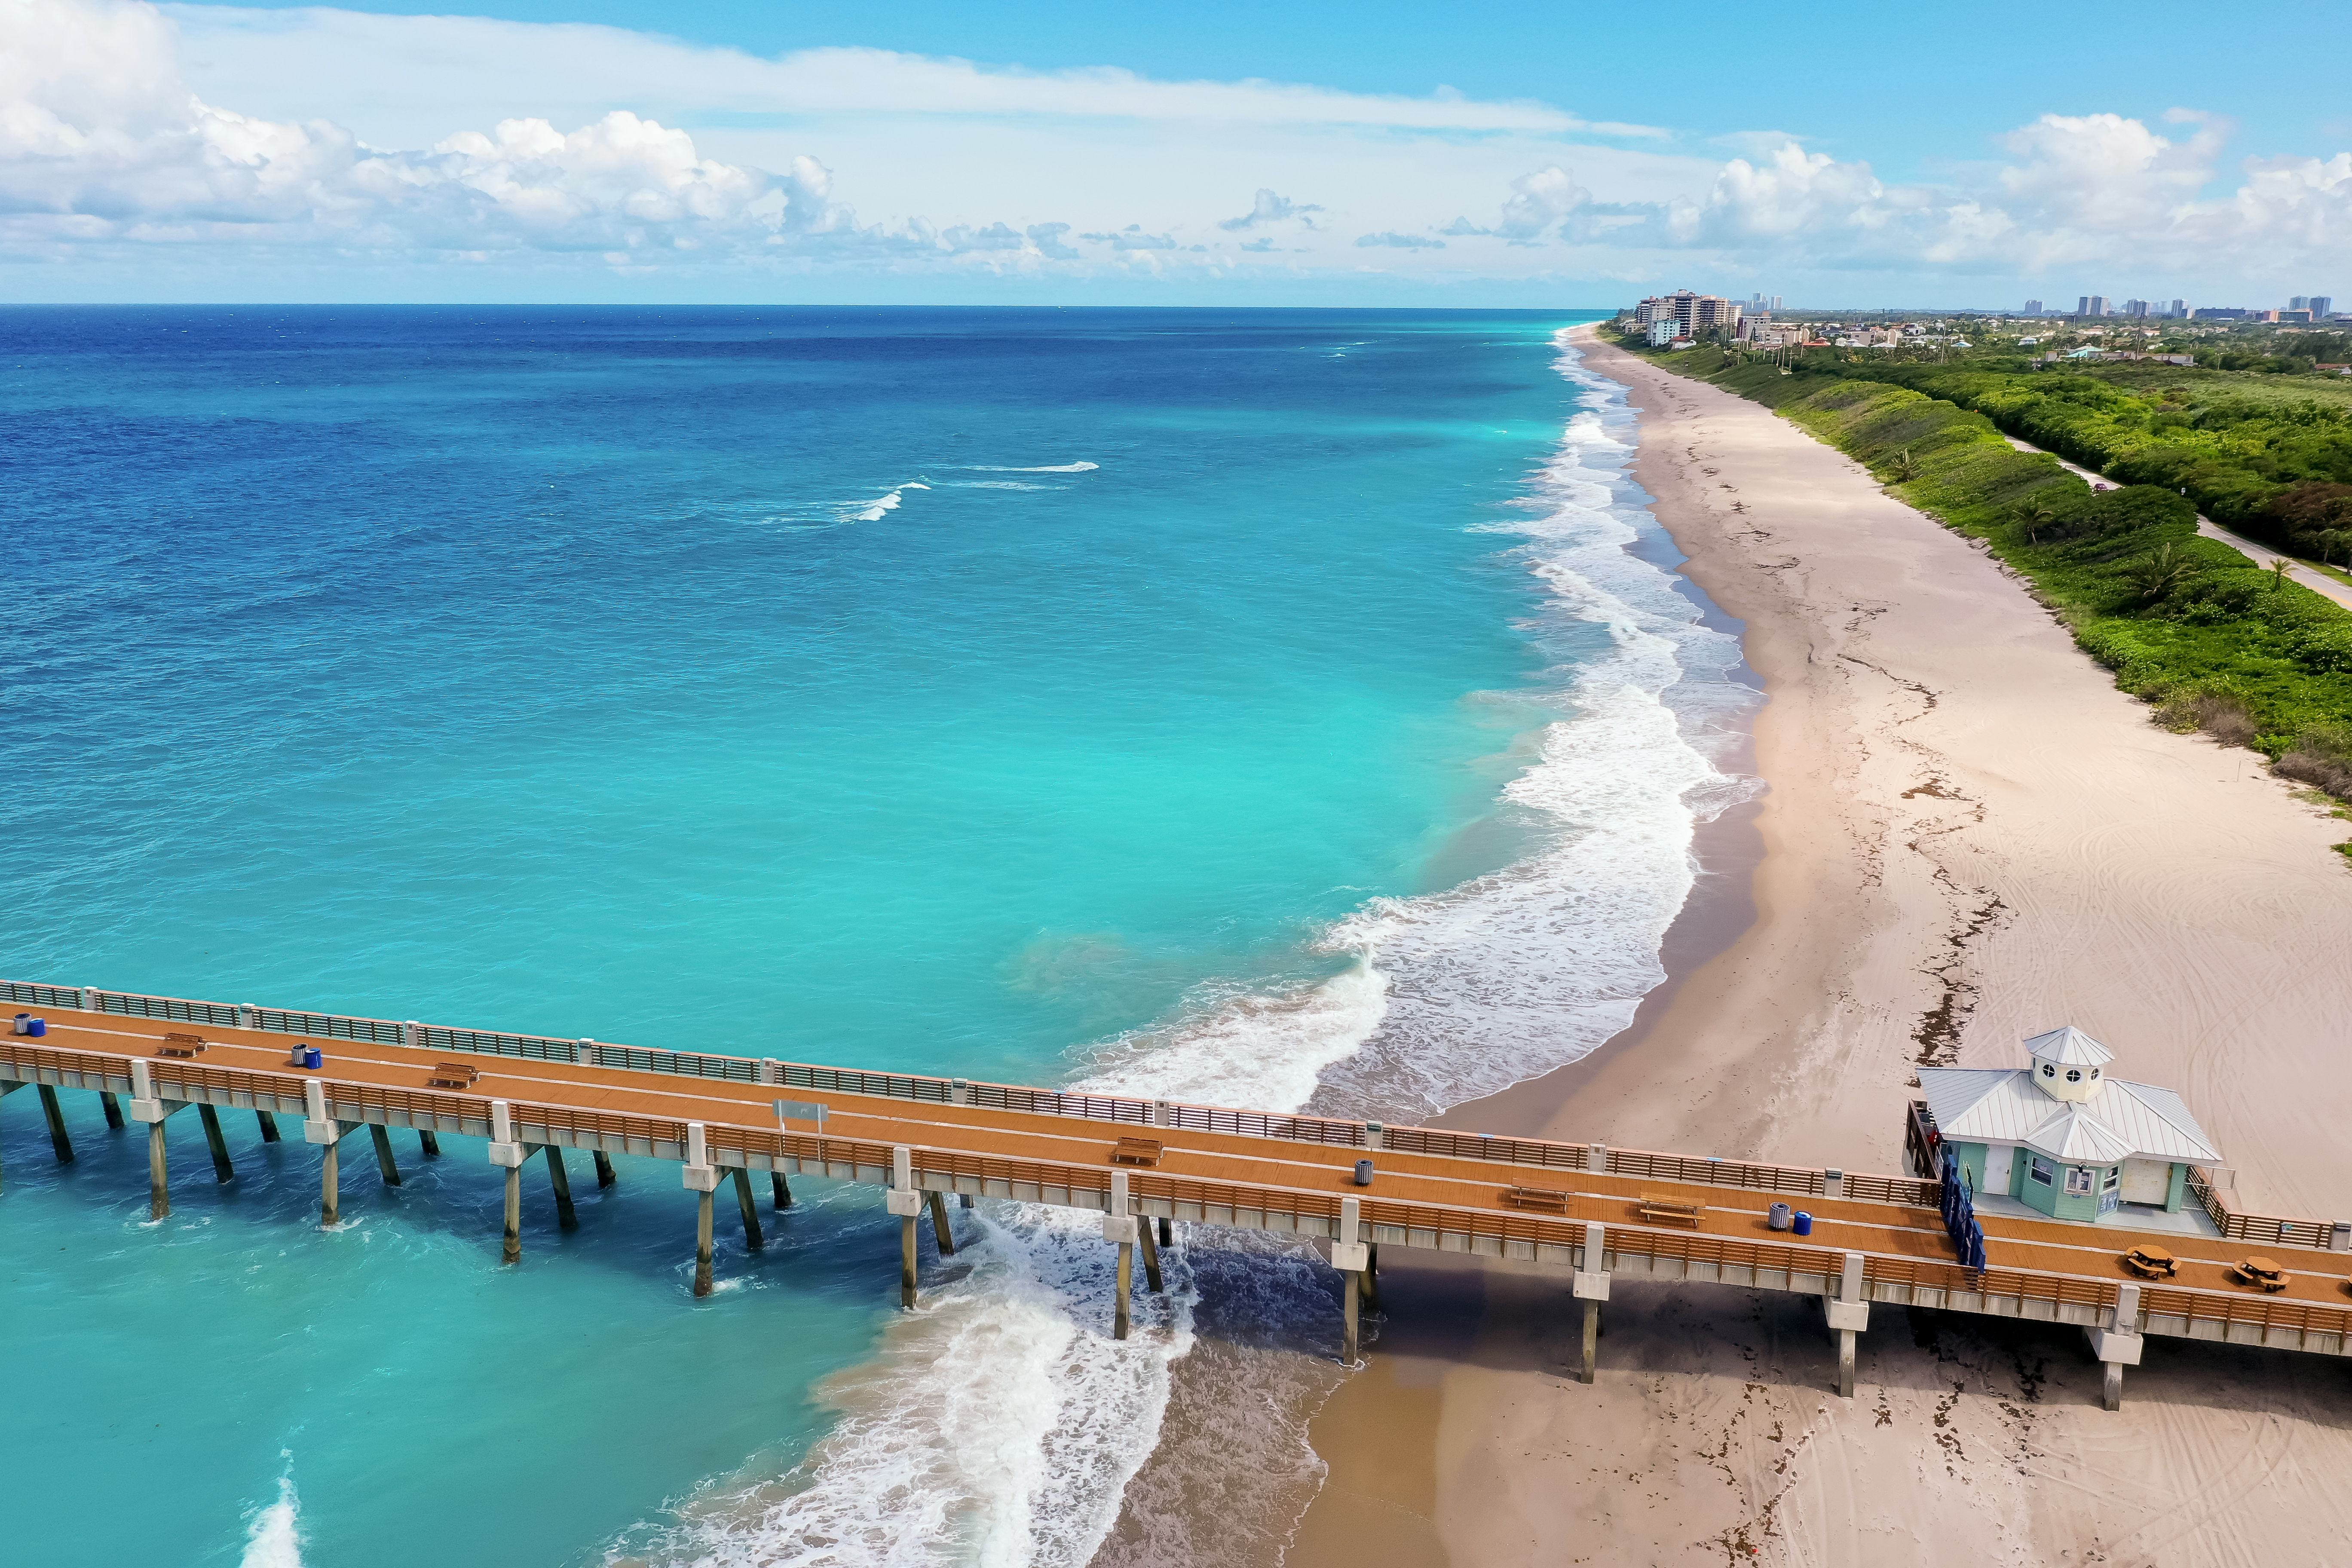 Pier and lifeguard stand over the golden sands and turquoise waters of Juno Beach, Florida, USA